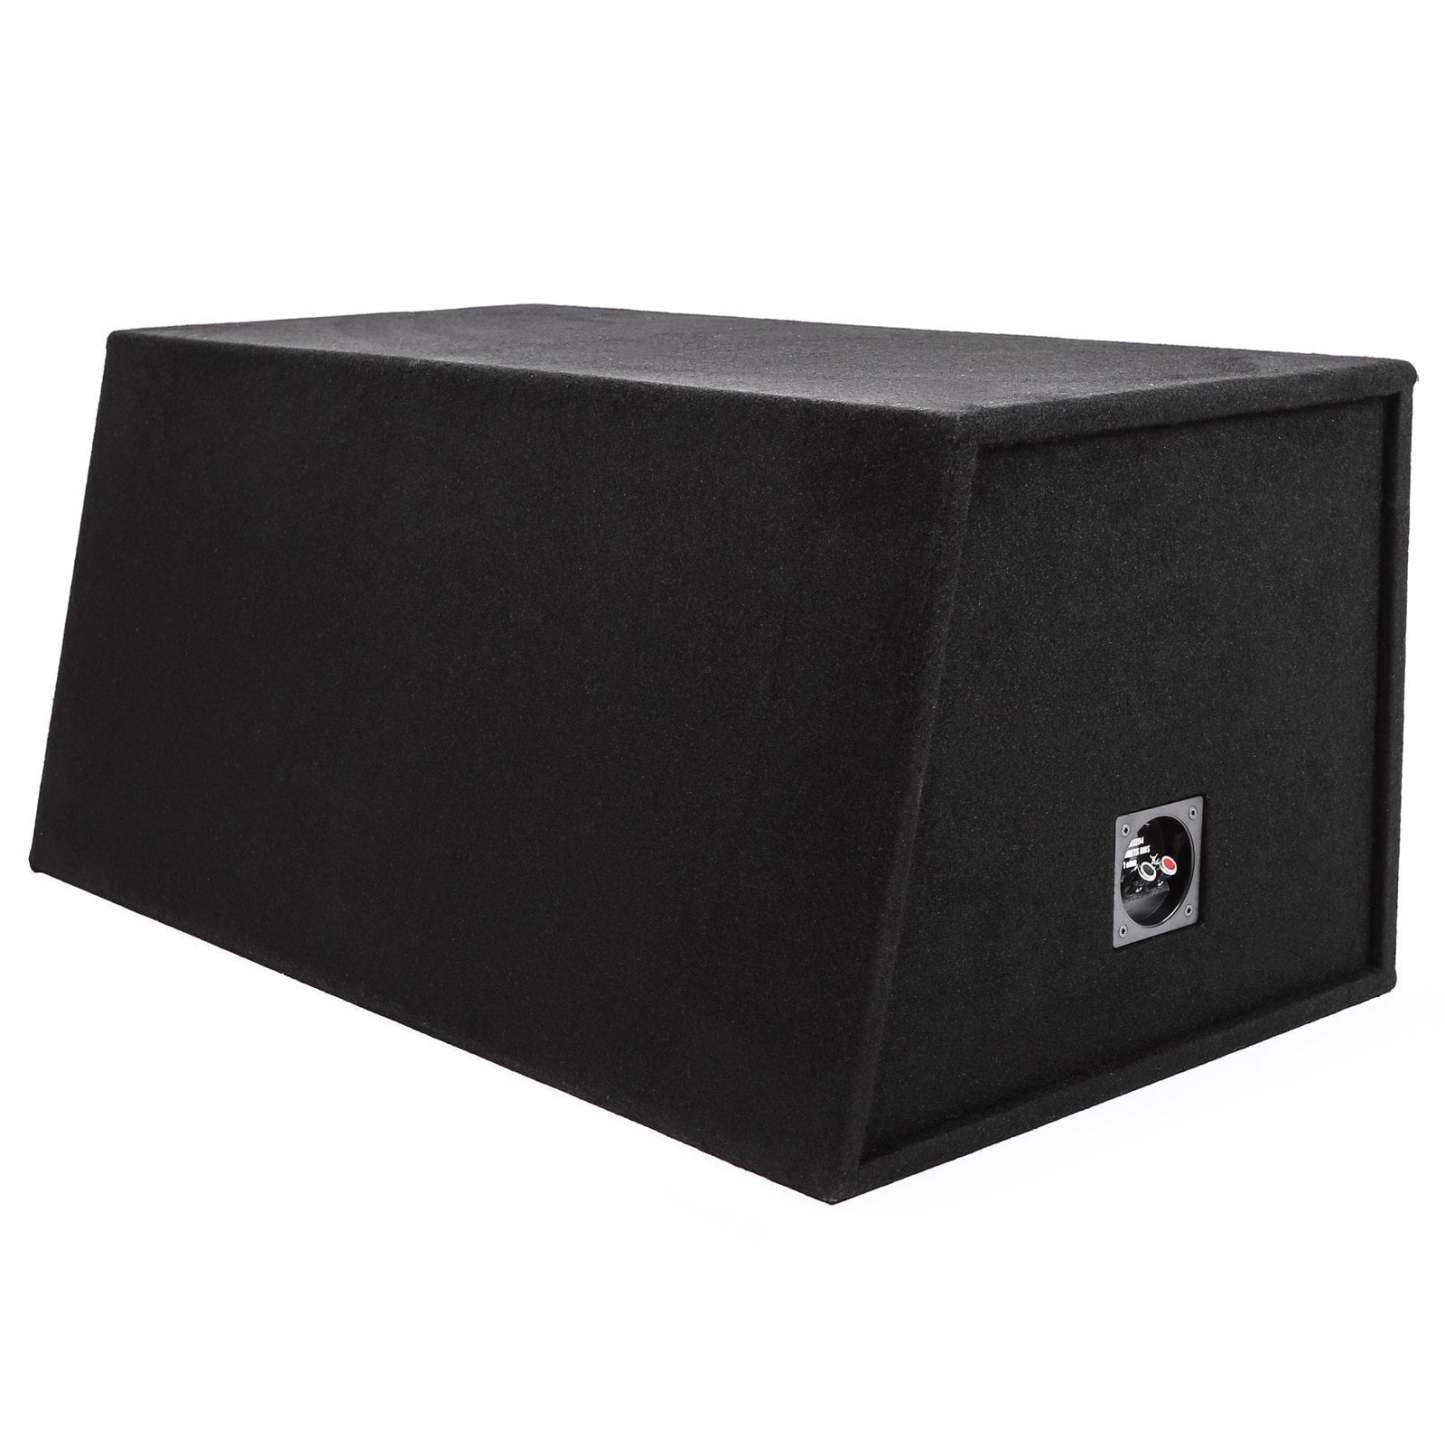 DUAL 12" 5,000 WATT EVL SERIES COMPLETE SUBWOOFER PACKAGE WITH VENTED ENCLOSURE AND AMPLIFIER